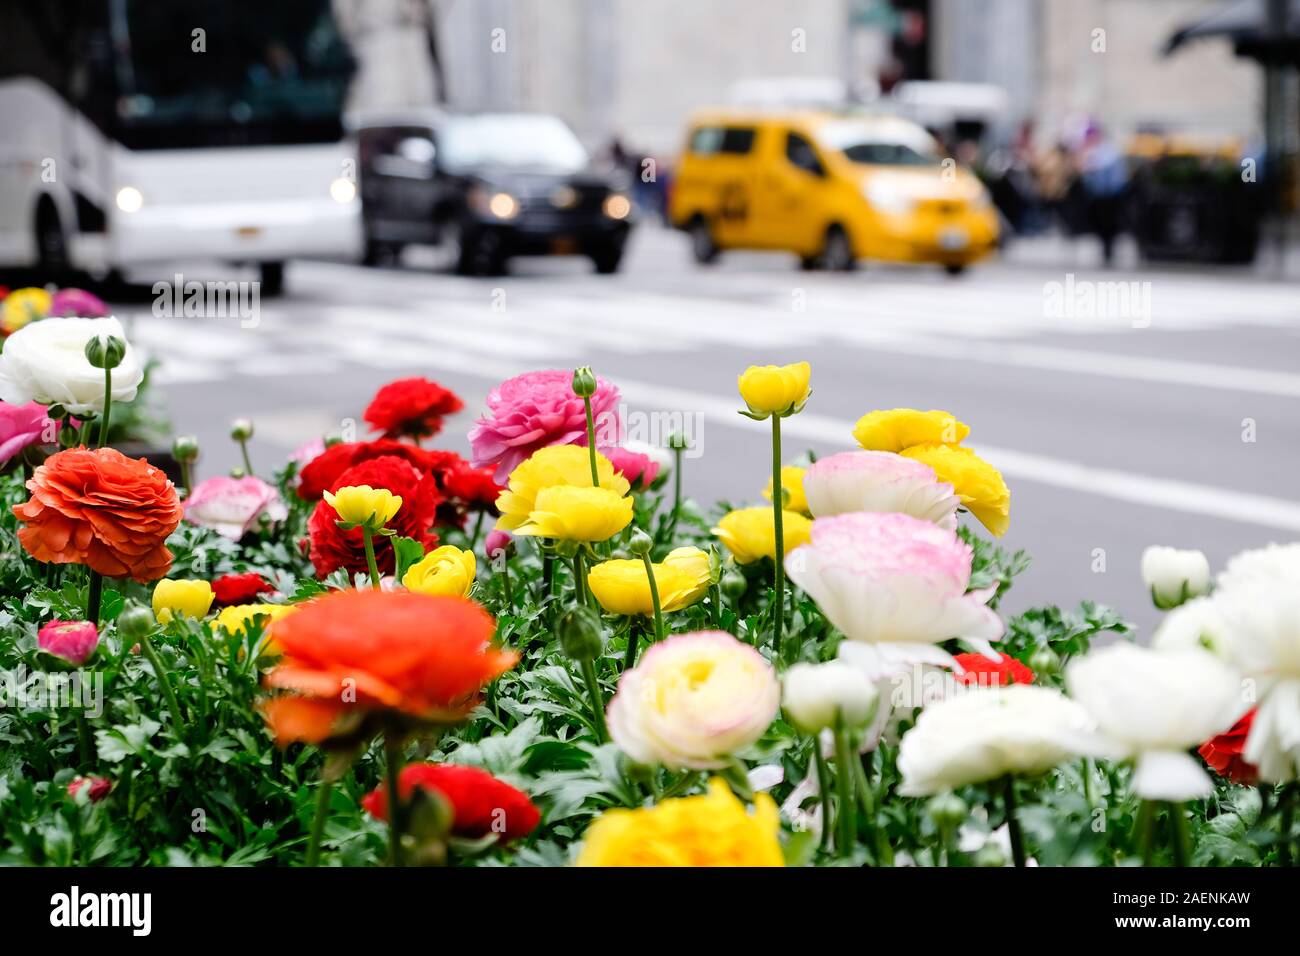 Nature struggling in a city: close up of flowers in New York with traffic in the background Stock Photo